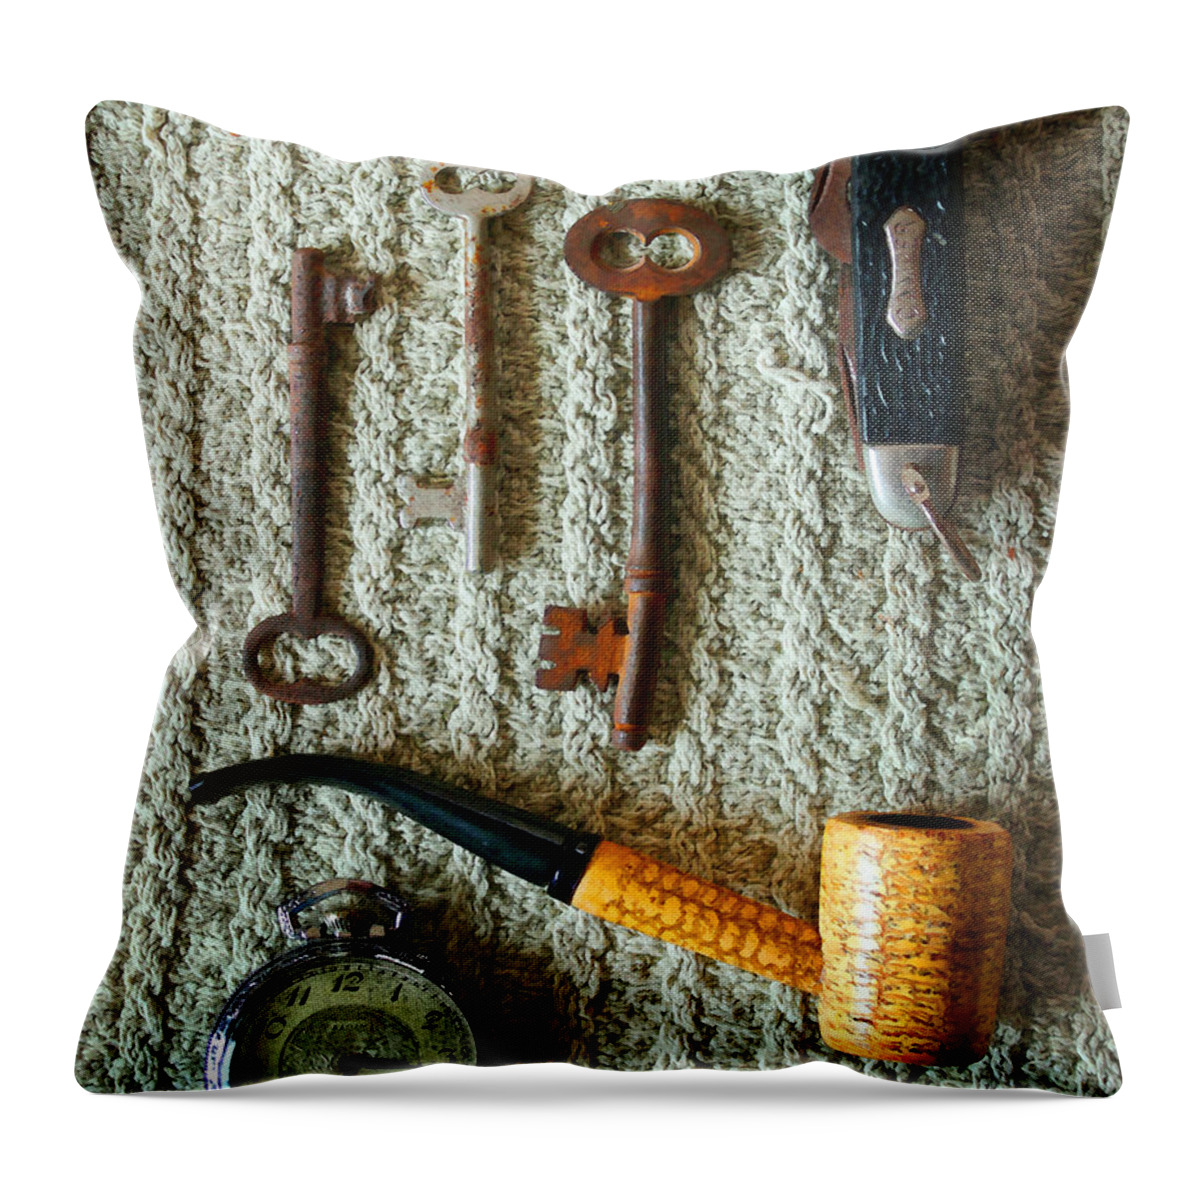 Still Life Throw Pillow featuring the photograph Six Sixteen by Timothy Bulone